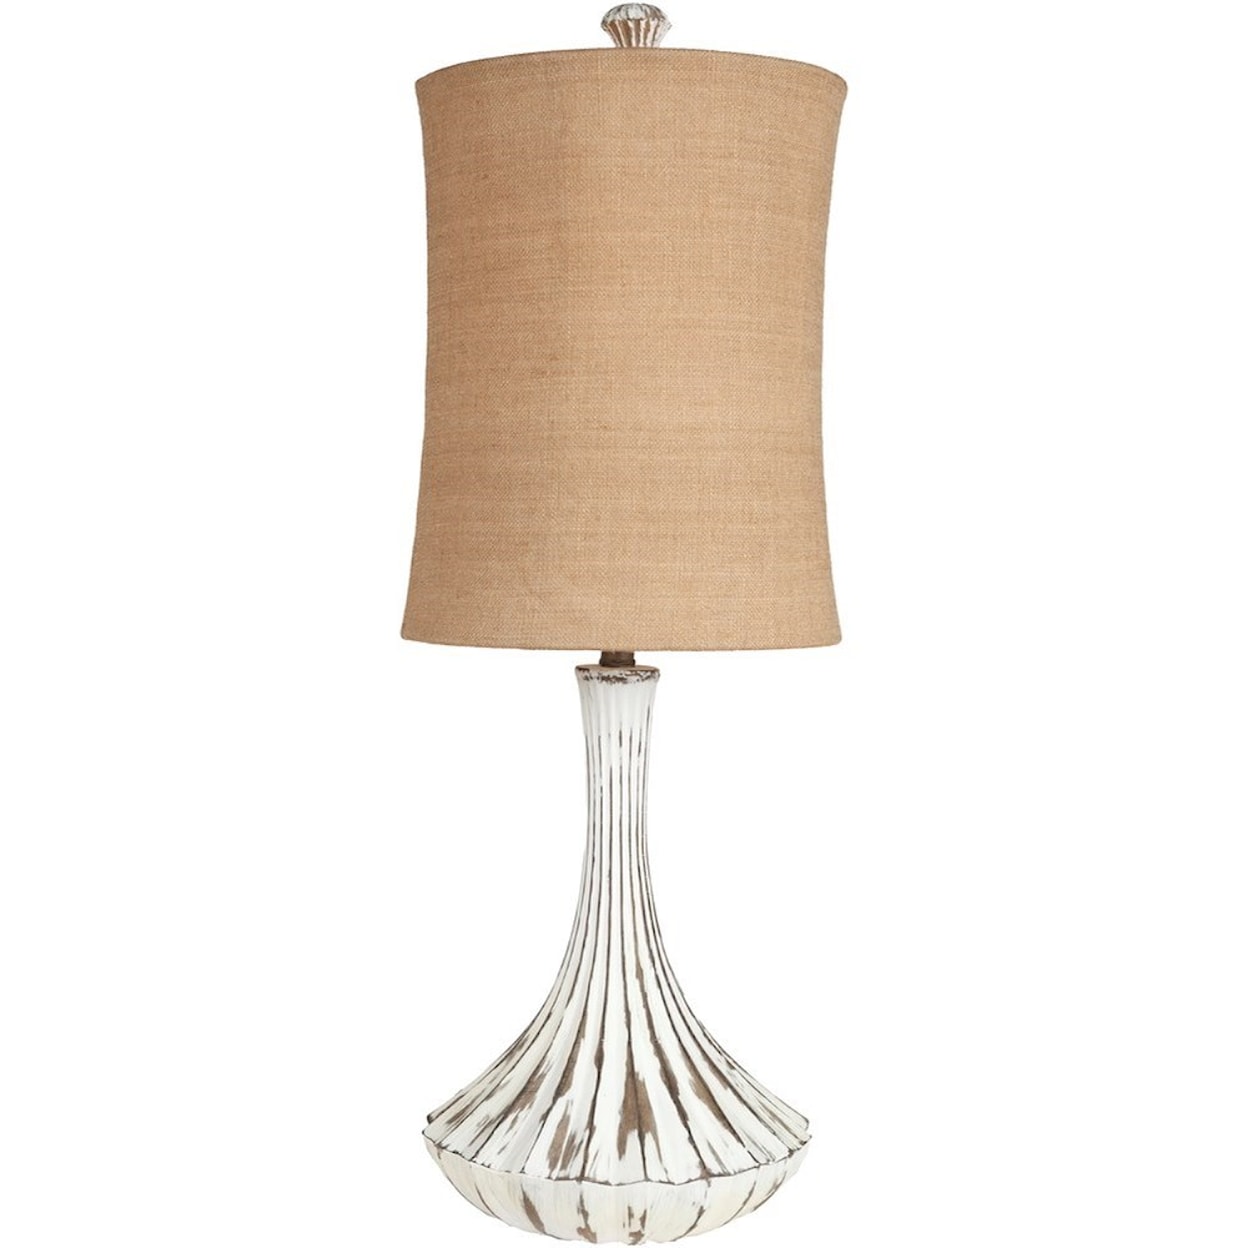 Surya Lamps Distressed White Rustic Table Lamp